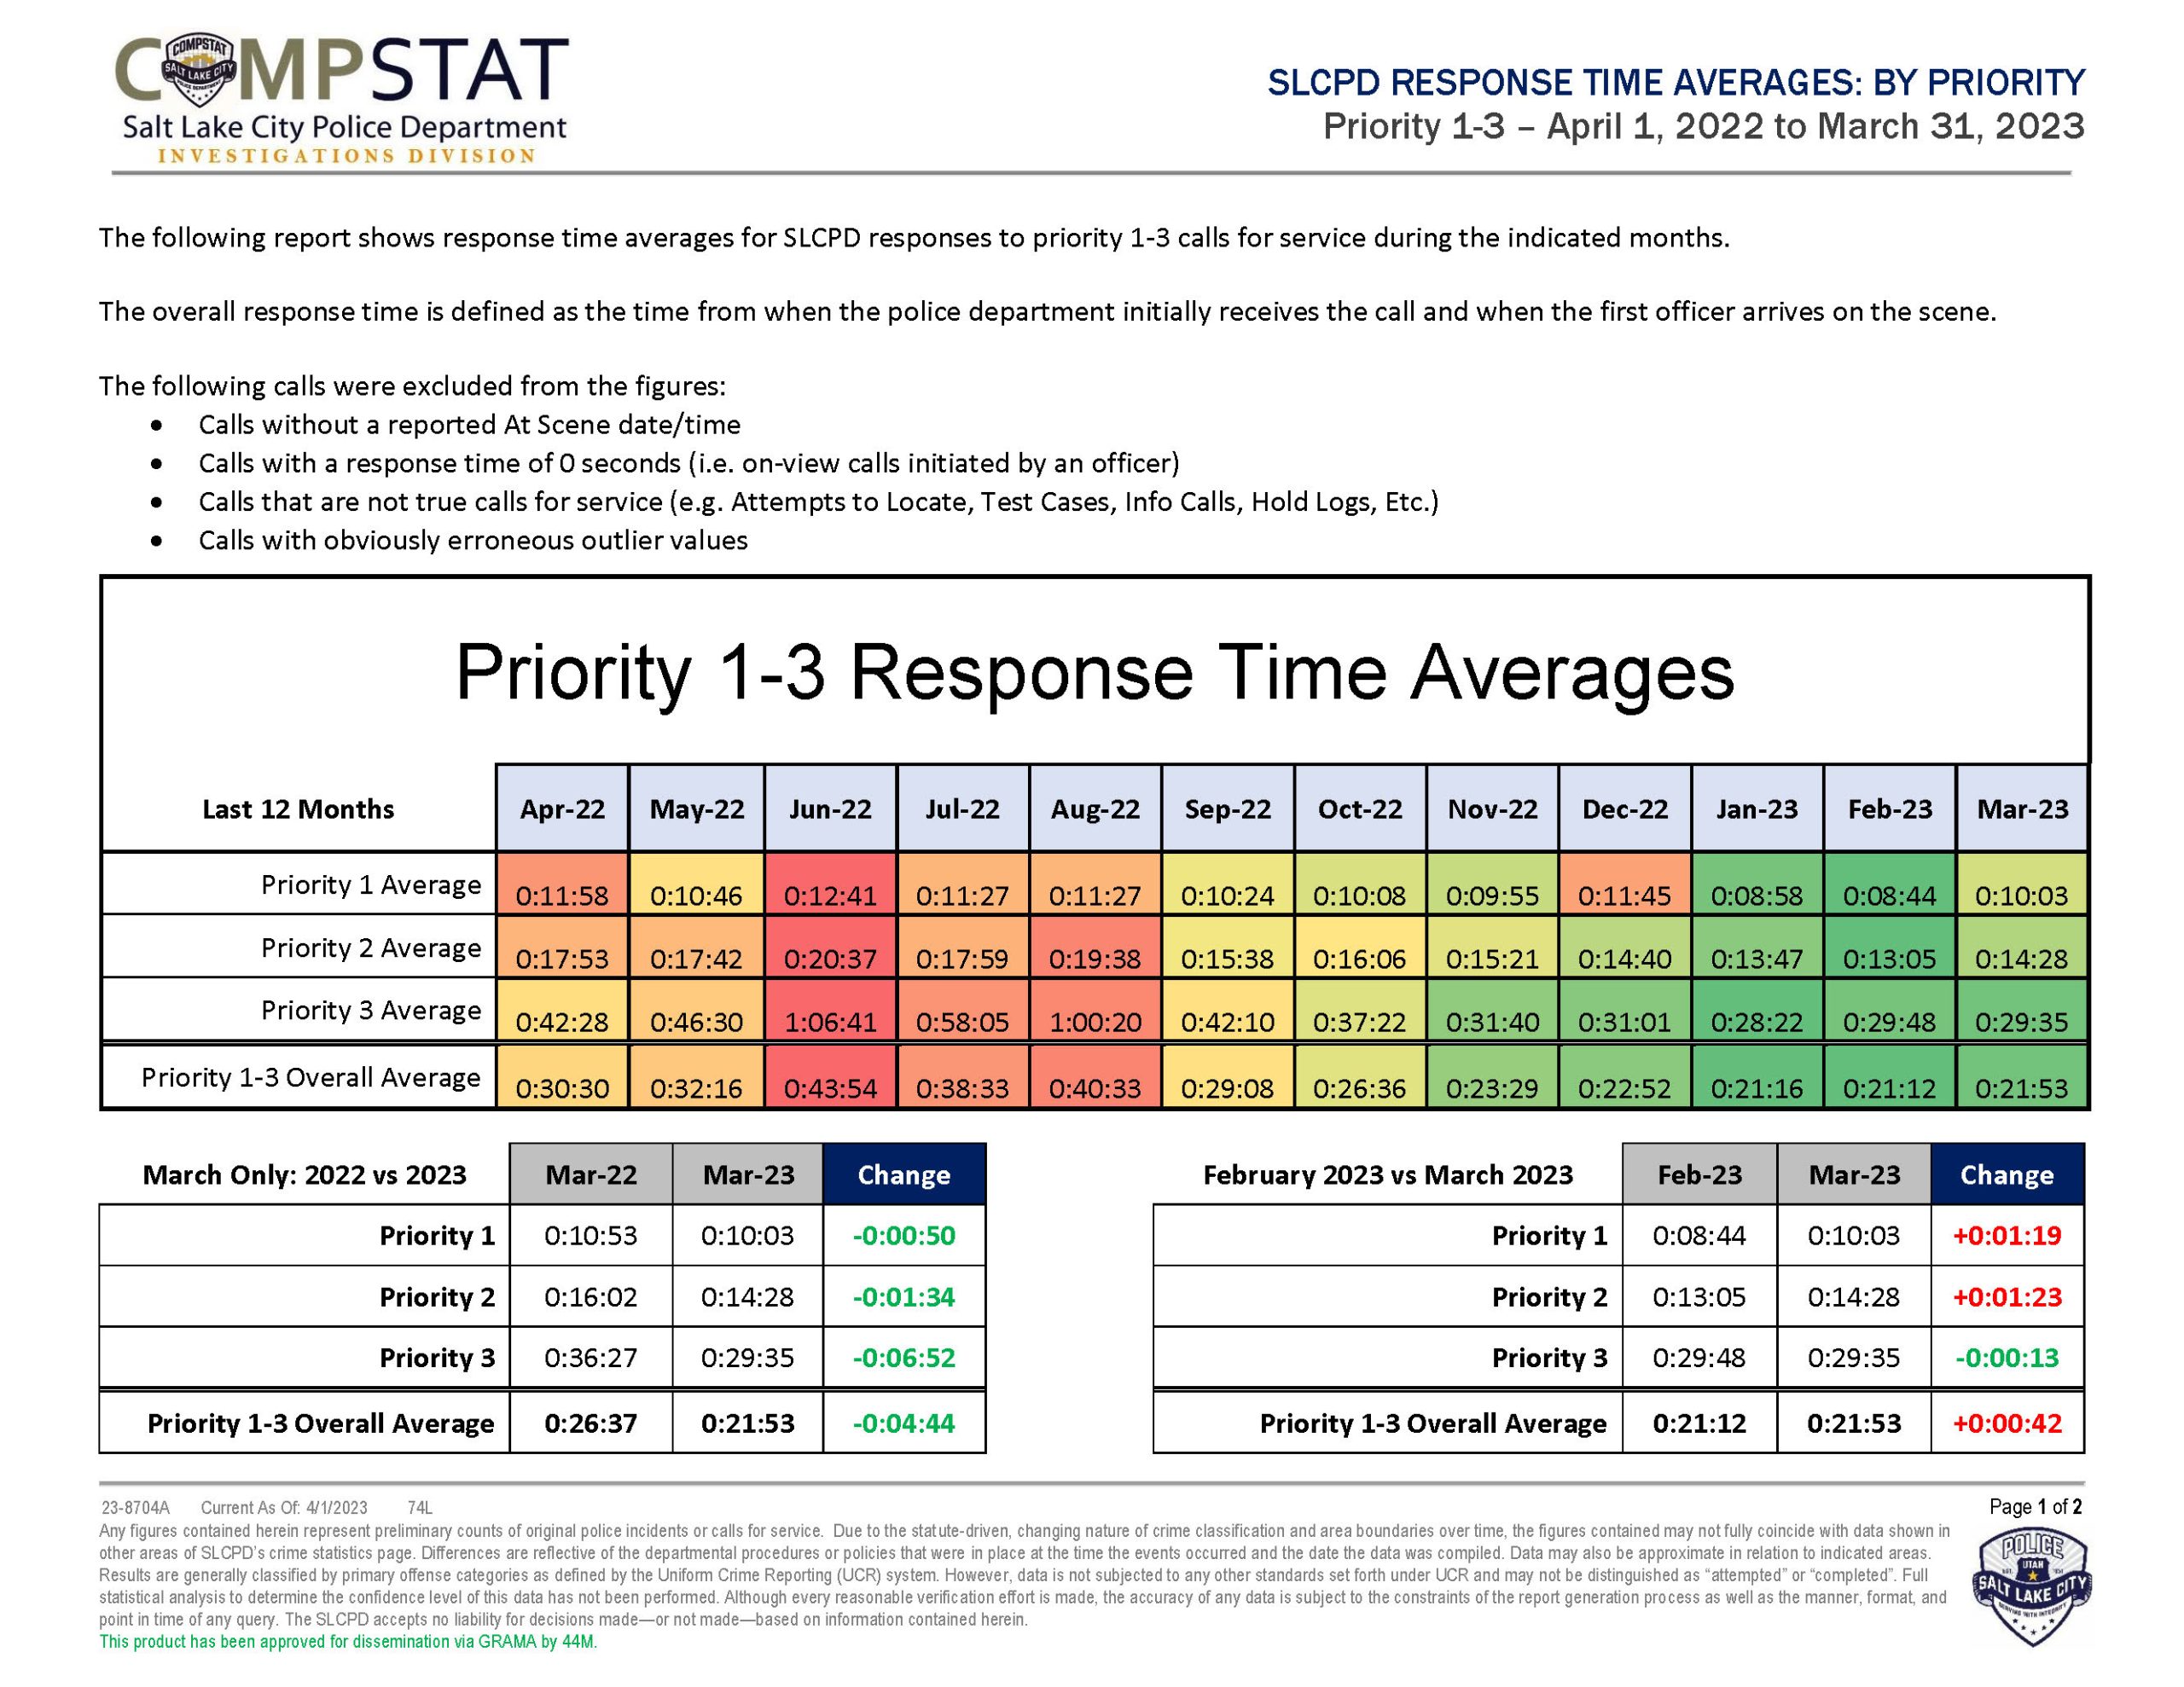 SLCPD Response Time Averages By Priority – March 2023 Update_Page_1